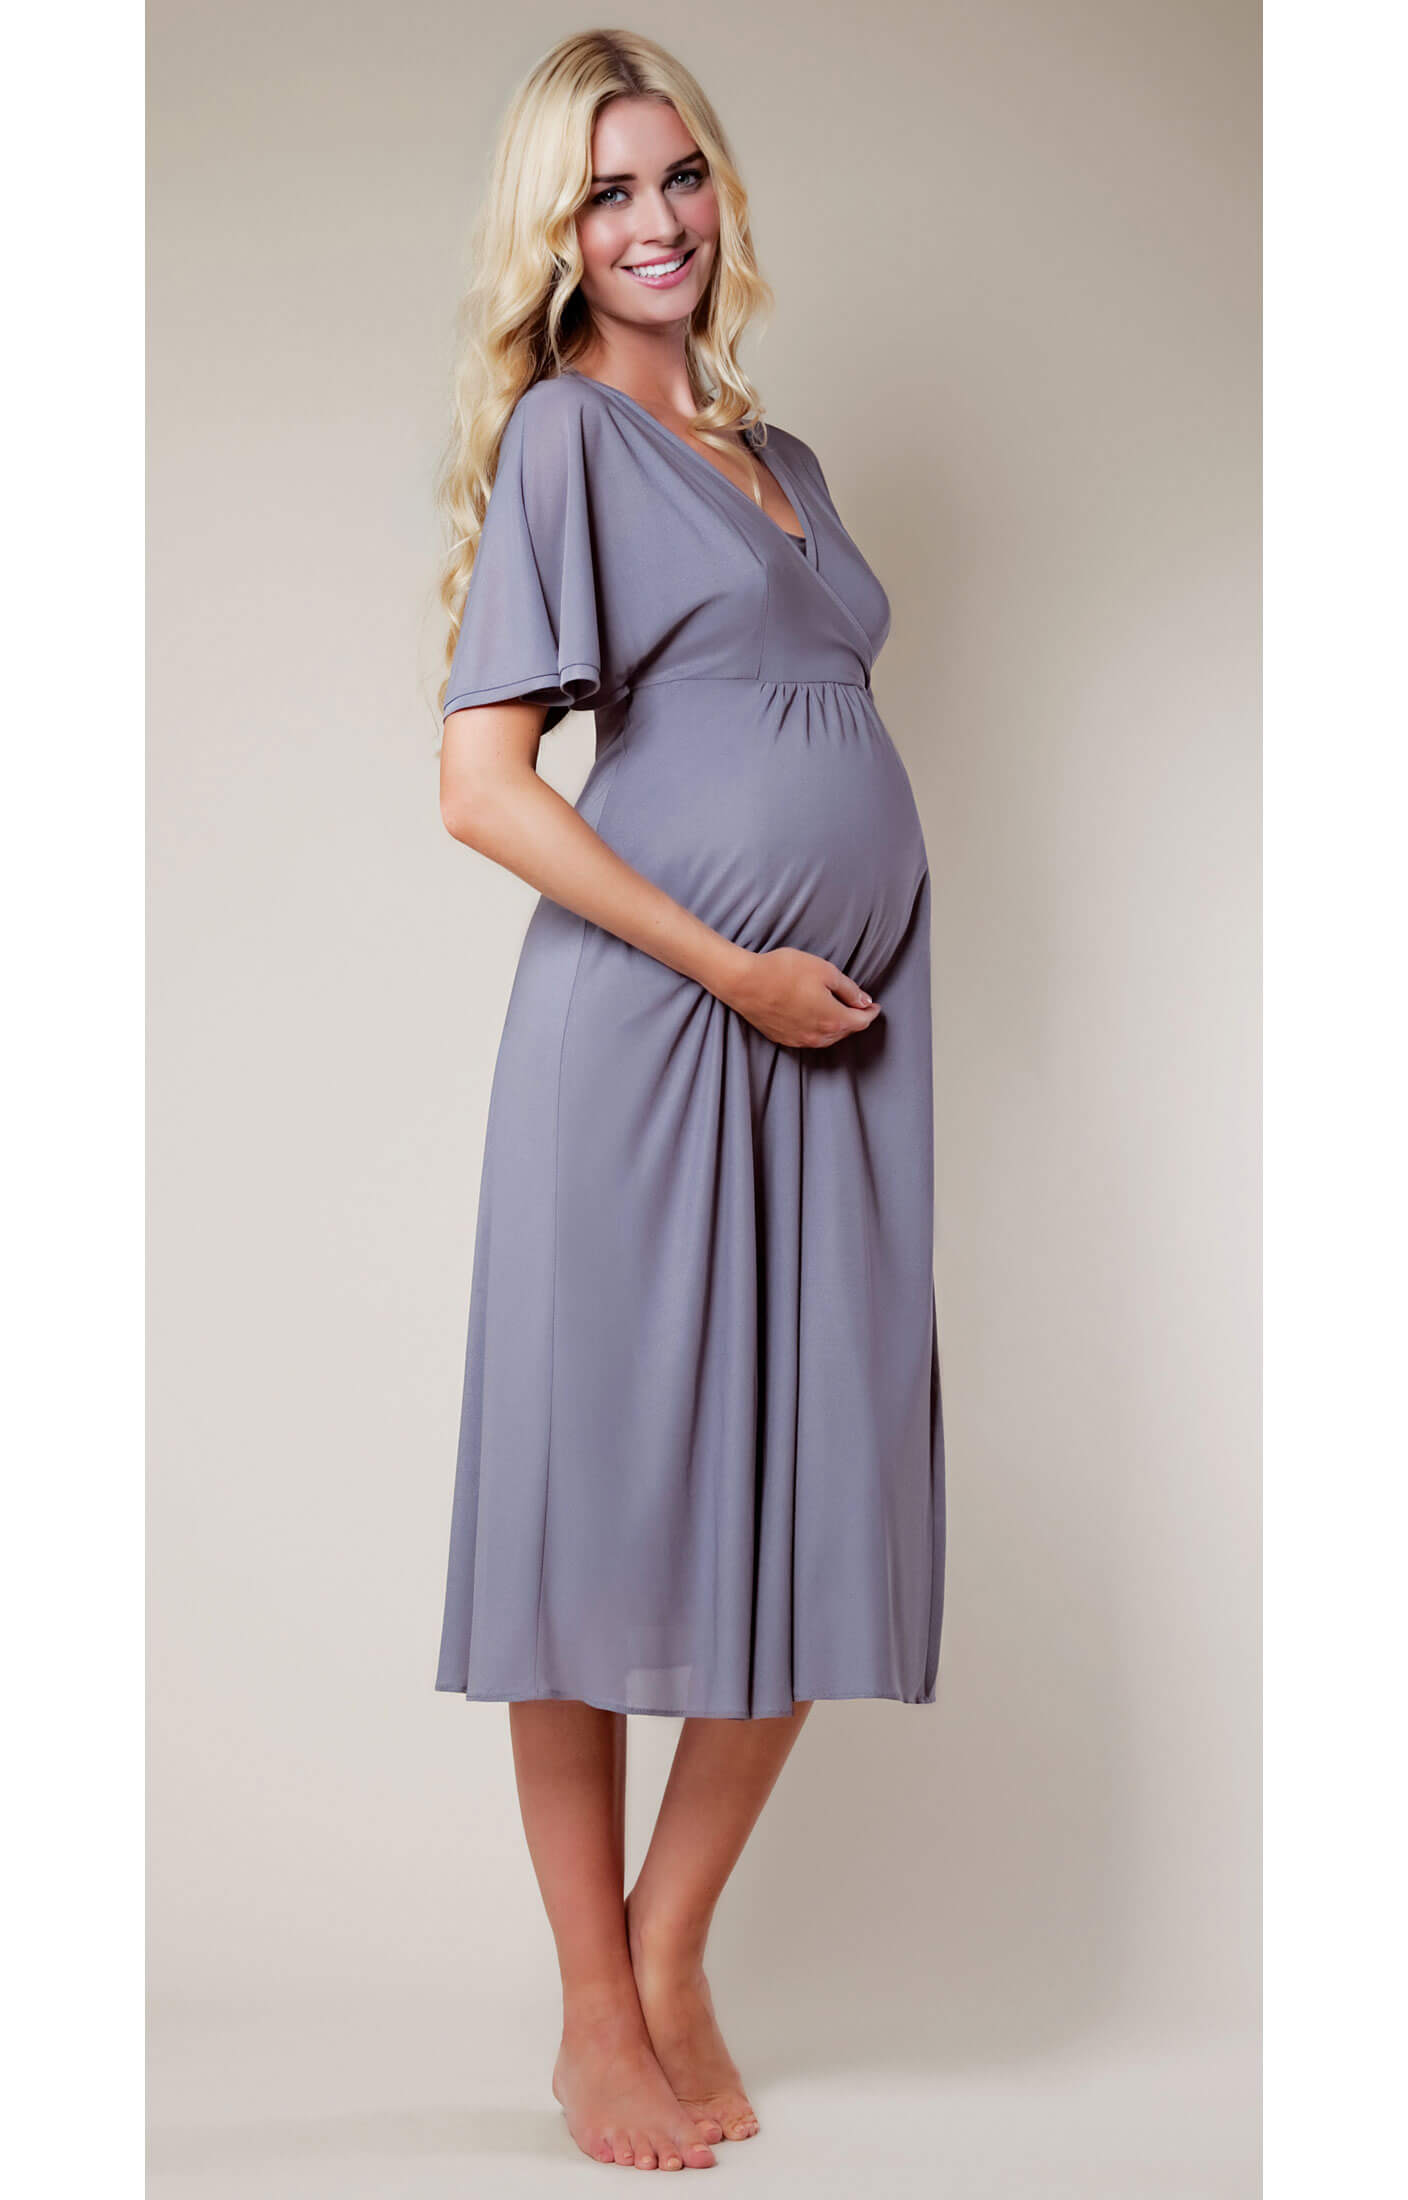 Serenity Robe - Maternity Wedding Dresses, Evening Wear and Party